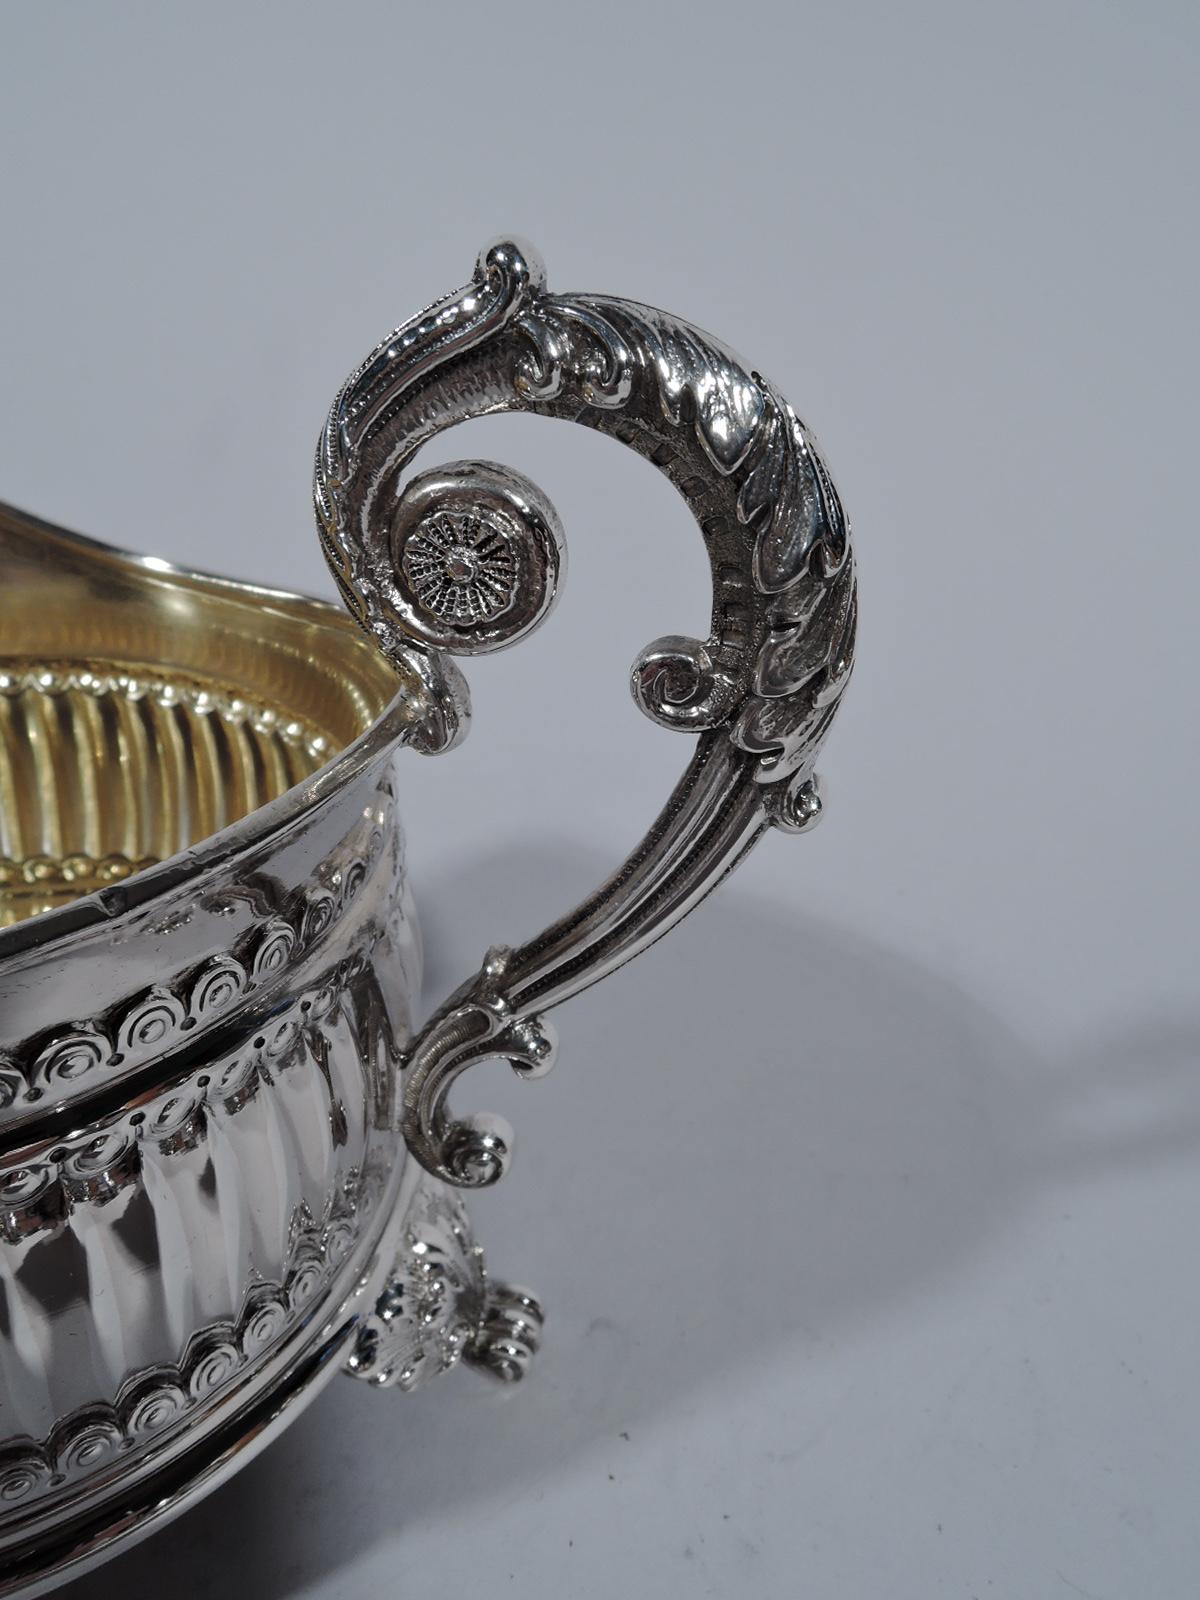 Neoclassical Revival Antique Neoclassical Sterling Silver Creamer and Sugar by Tiffany